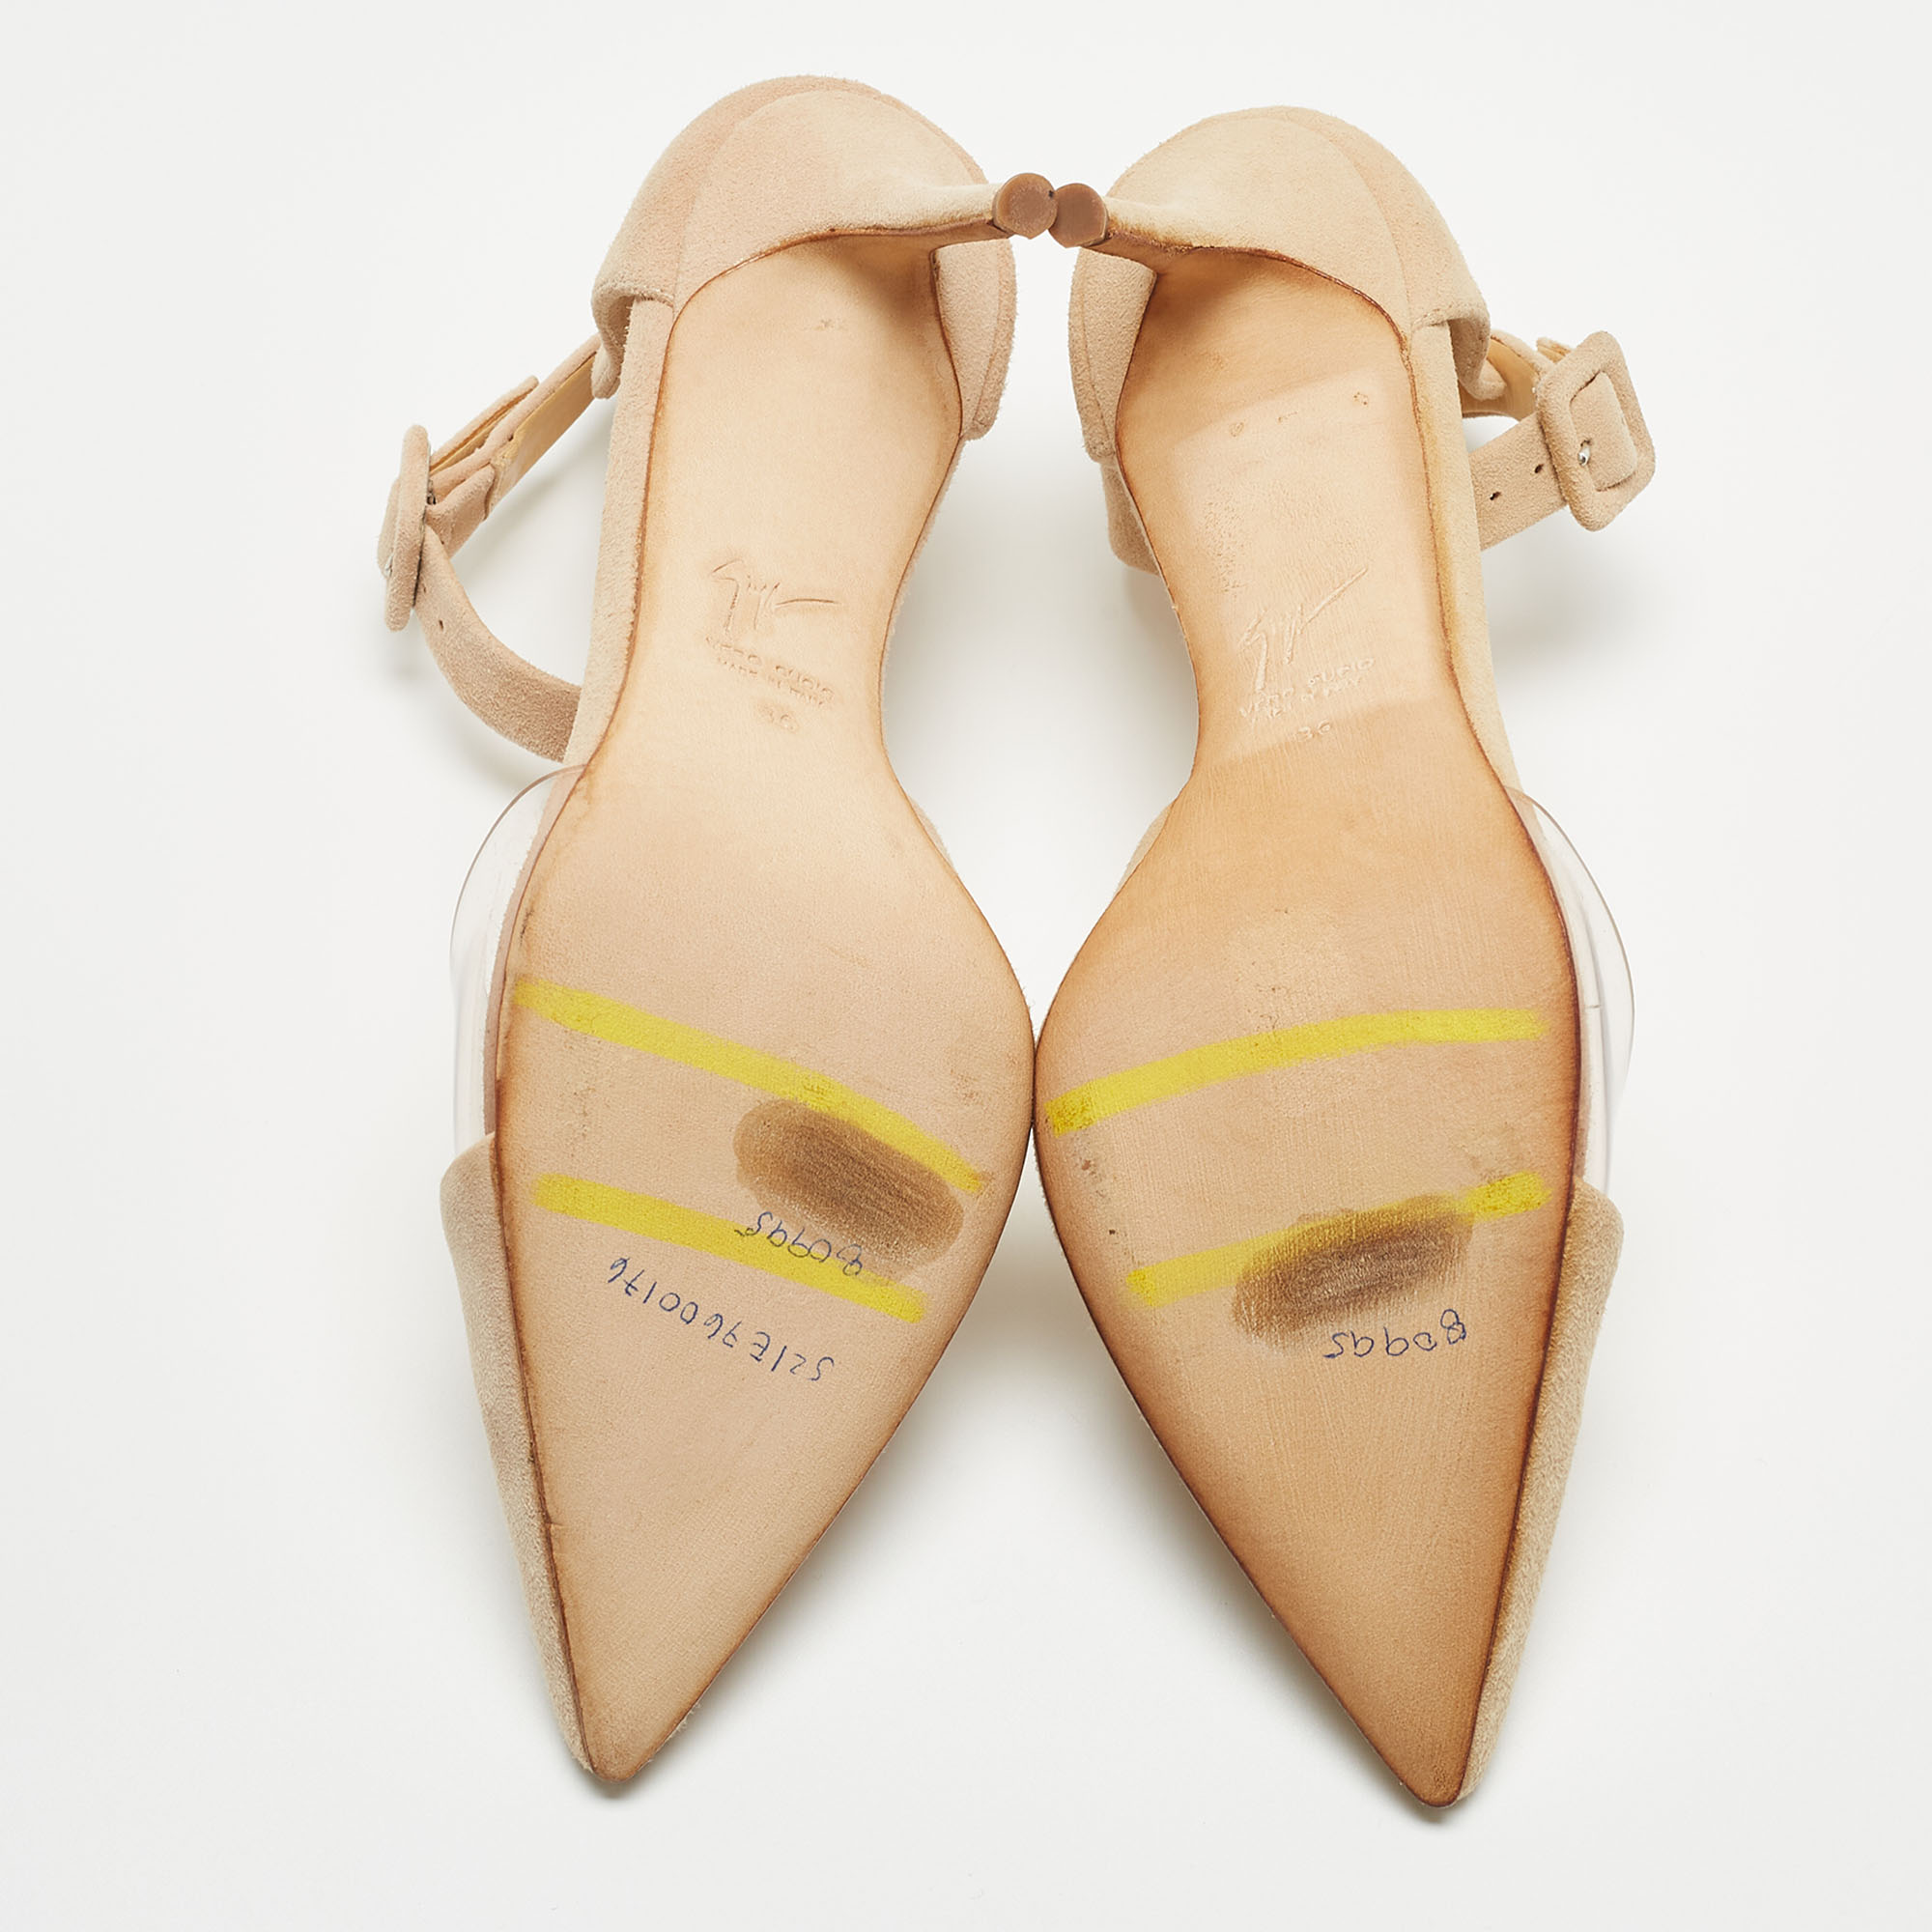 Giuseppe Zanotti Beige Suede And PVC Ankle Strap Pumps Size 36